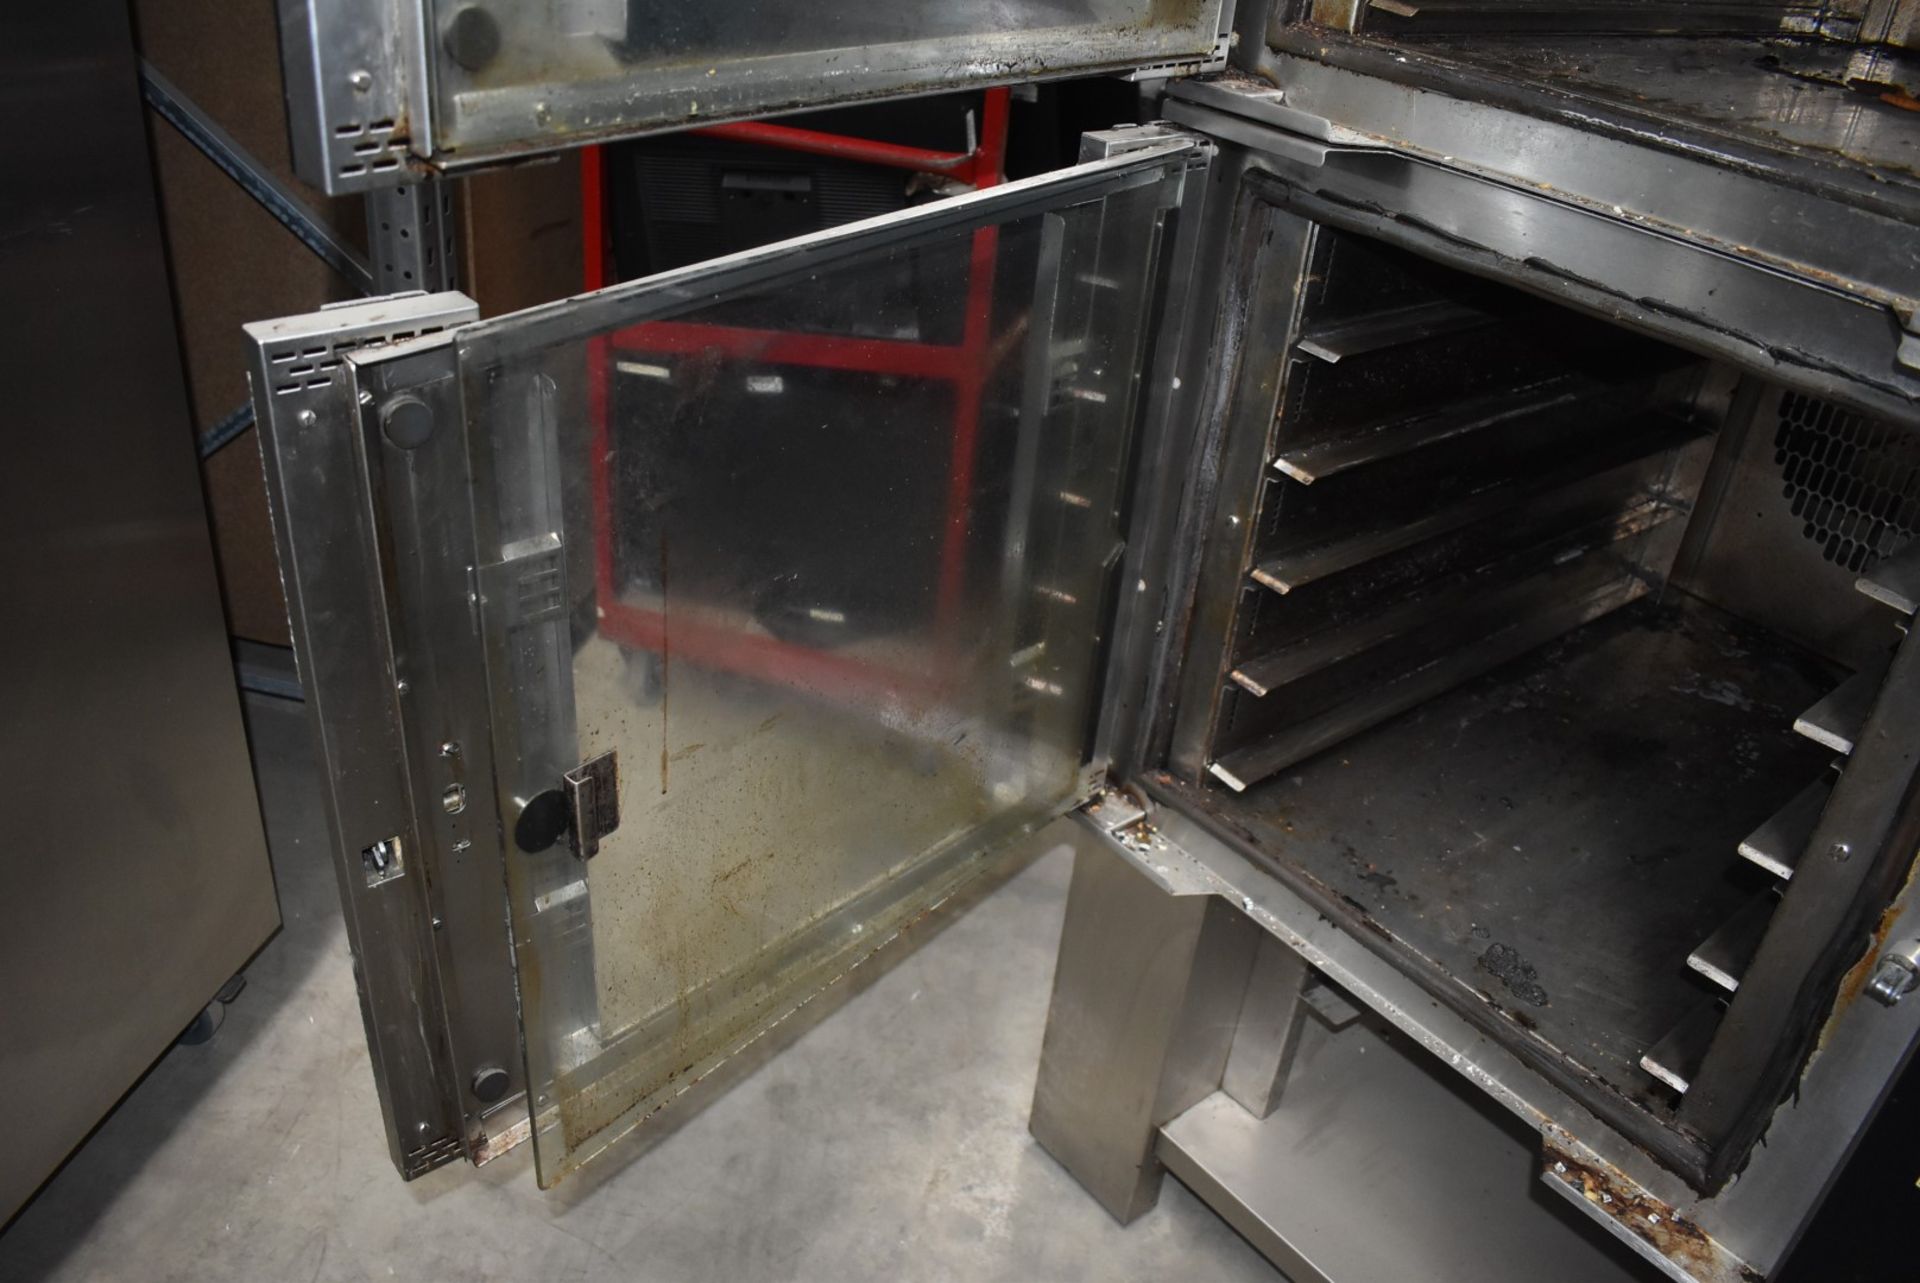 1 x Tom Chandley TC5 Double Convection Bakery Oven - Recently Removed From a Major Supermarket Store - Image 7 of 14